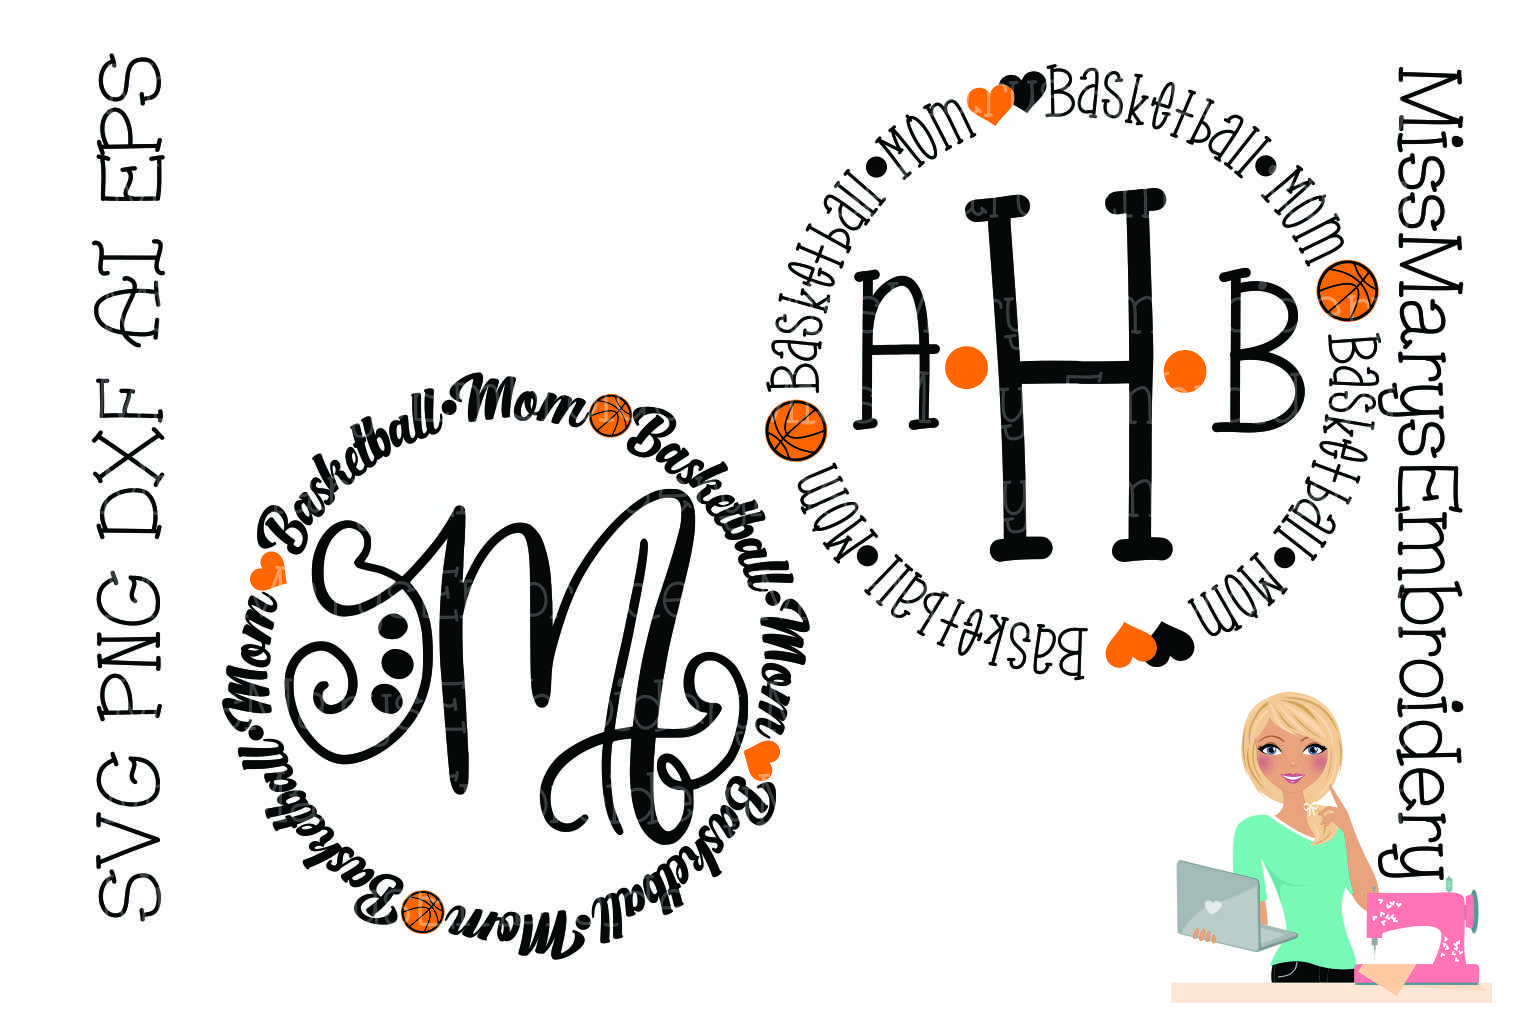 Download Basketball Mom Monogram SVG Cutting File PNG DXF AI EPS ...